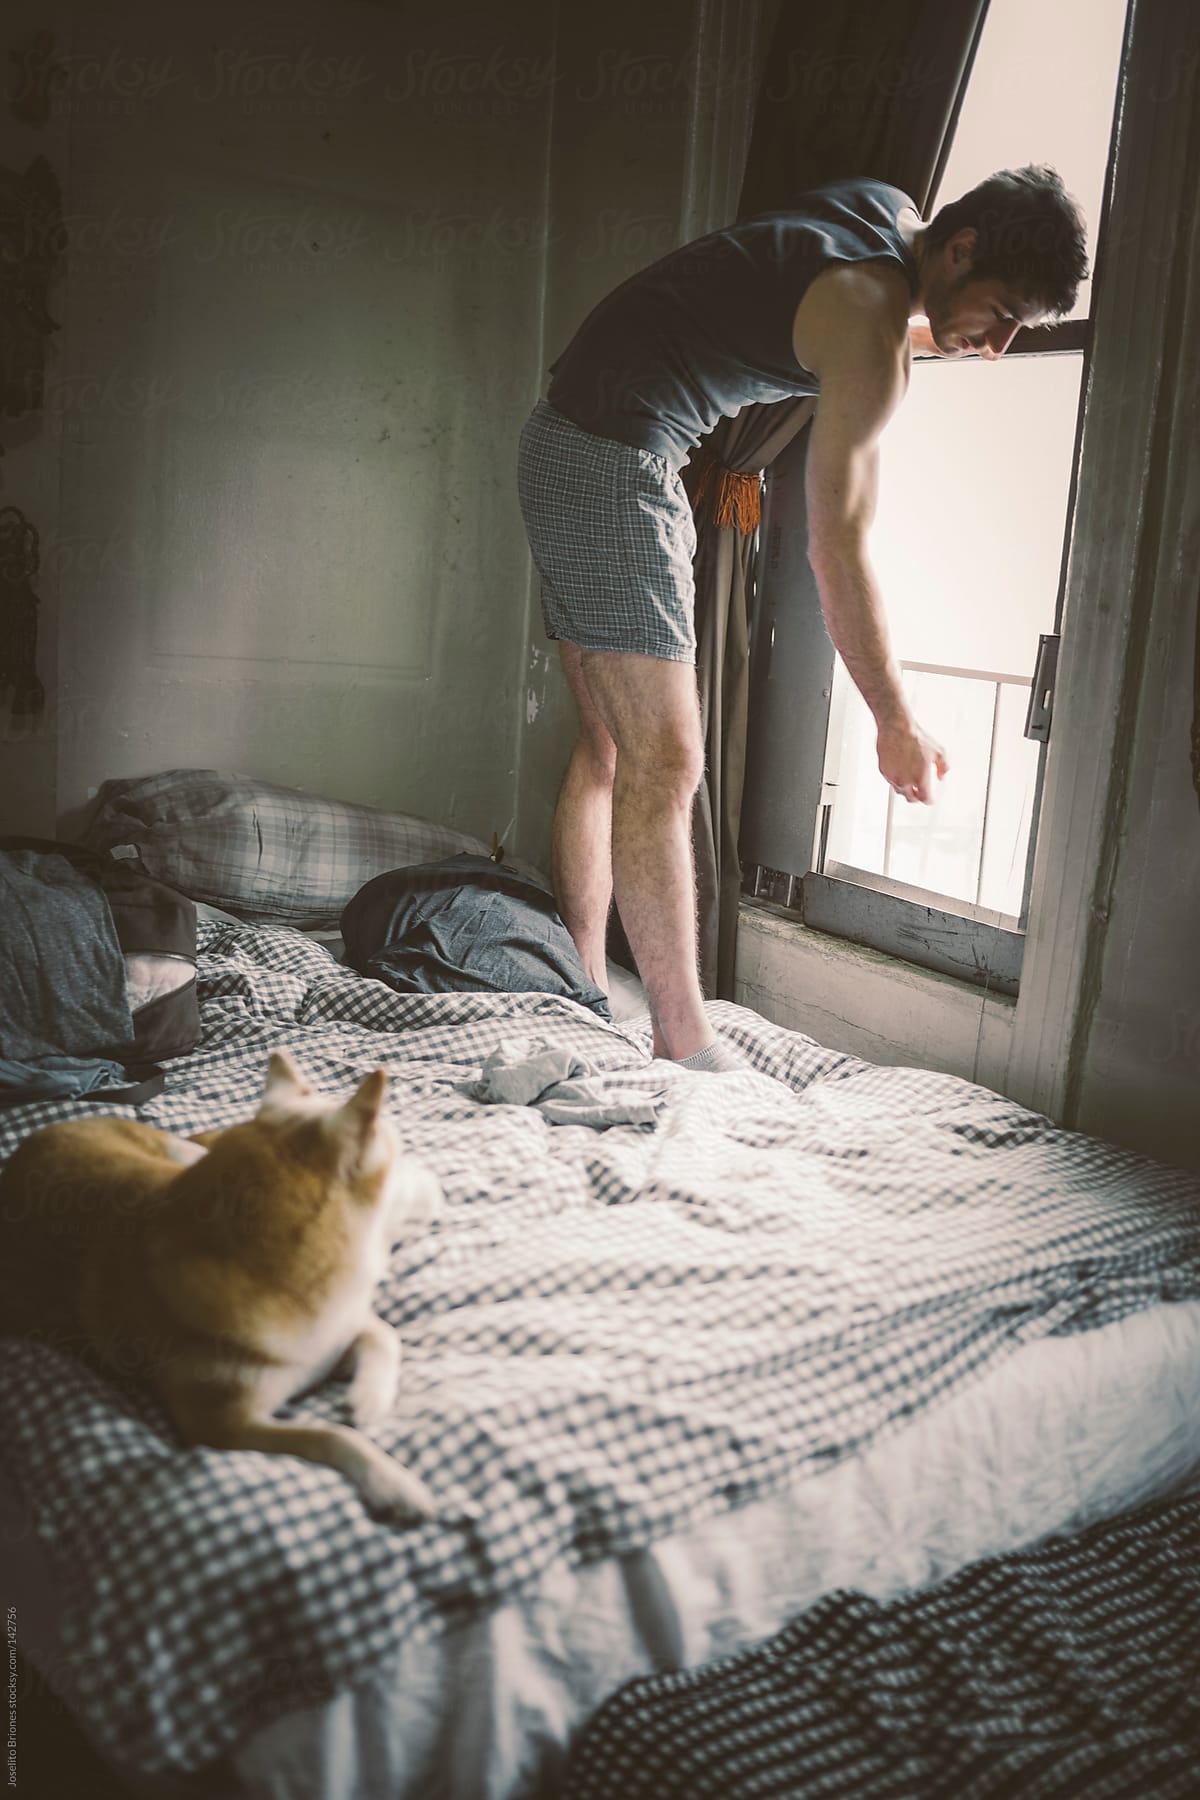 Man Opens Bedroom Window while Pet Dog Watches